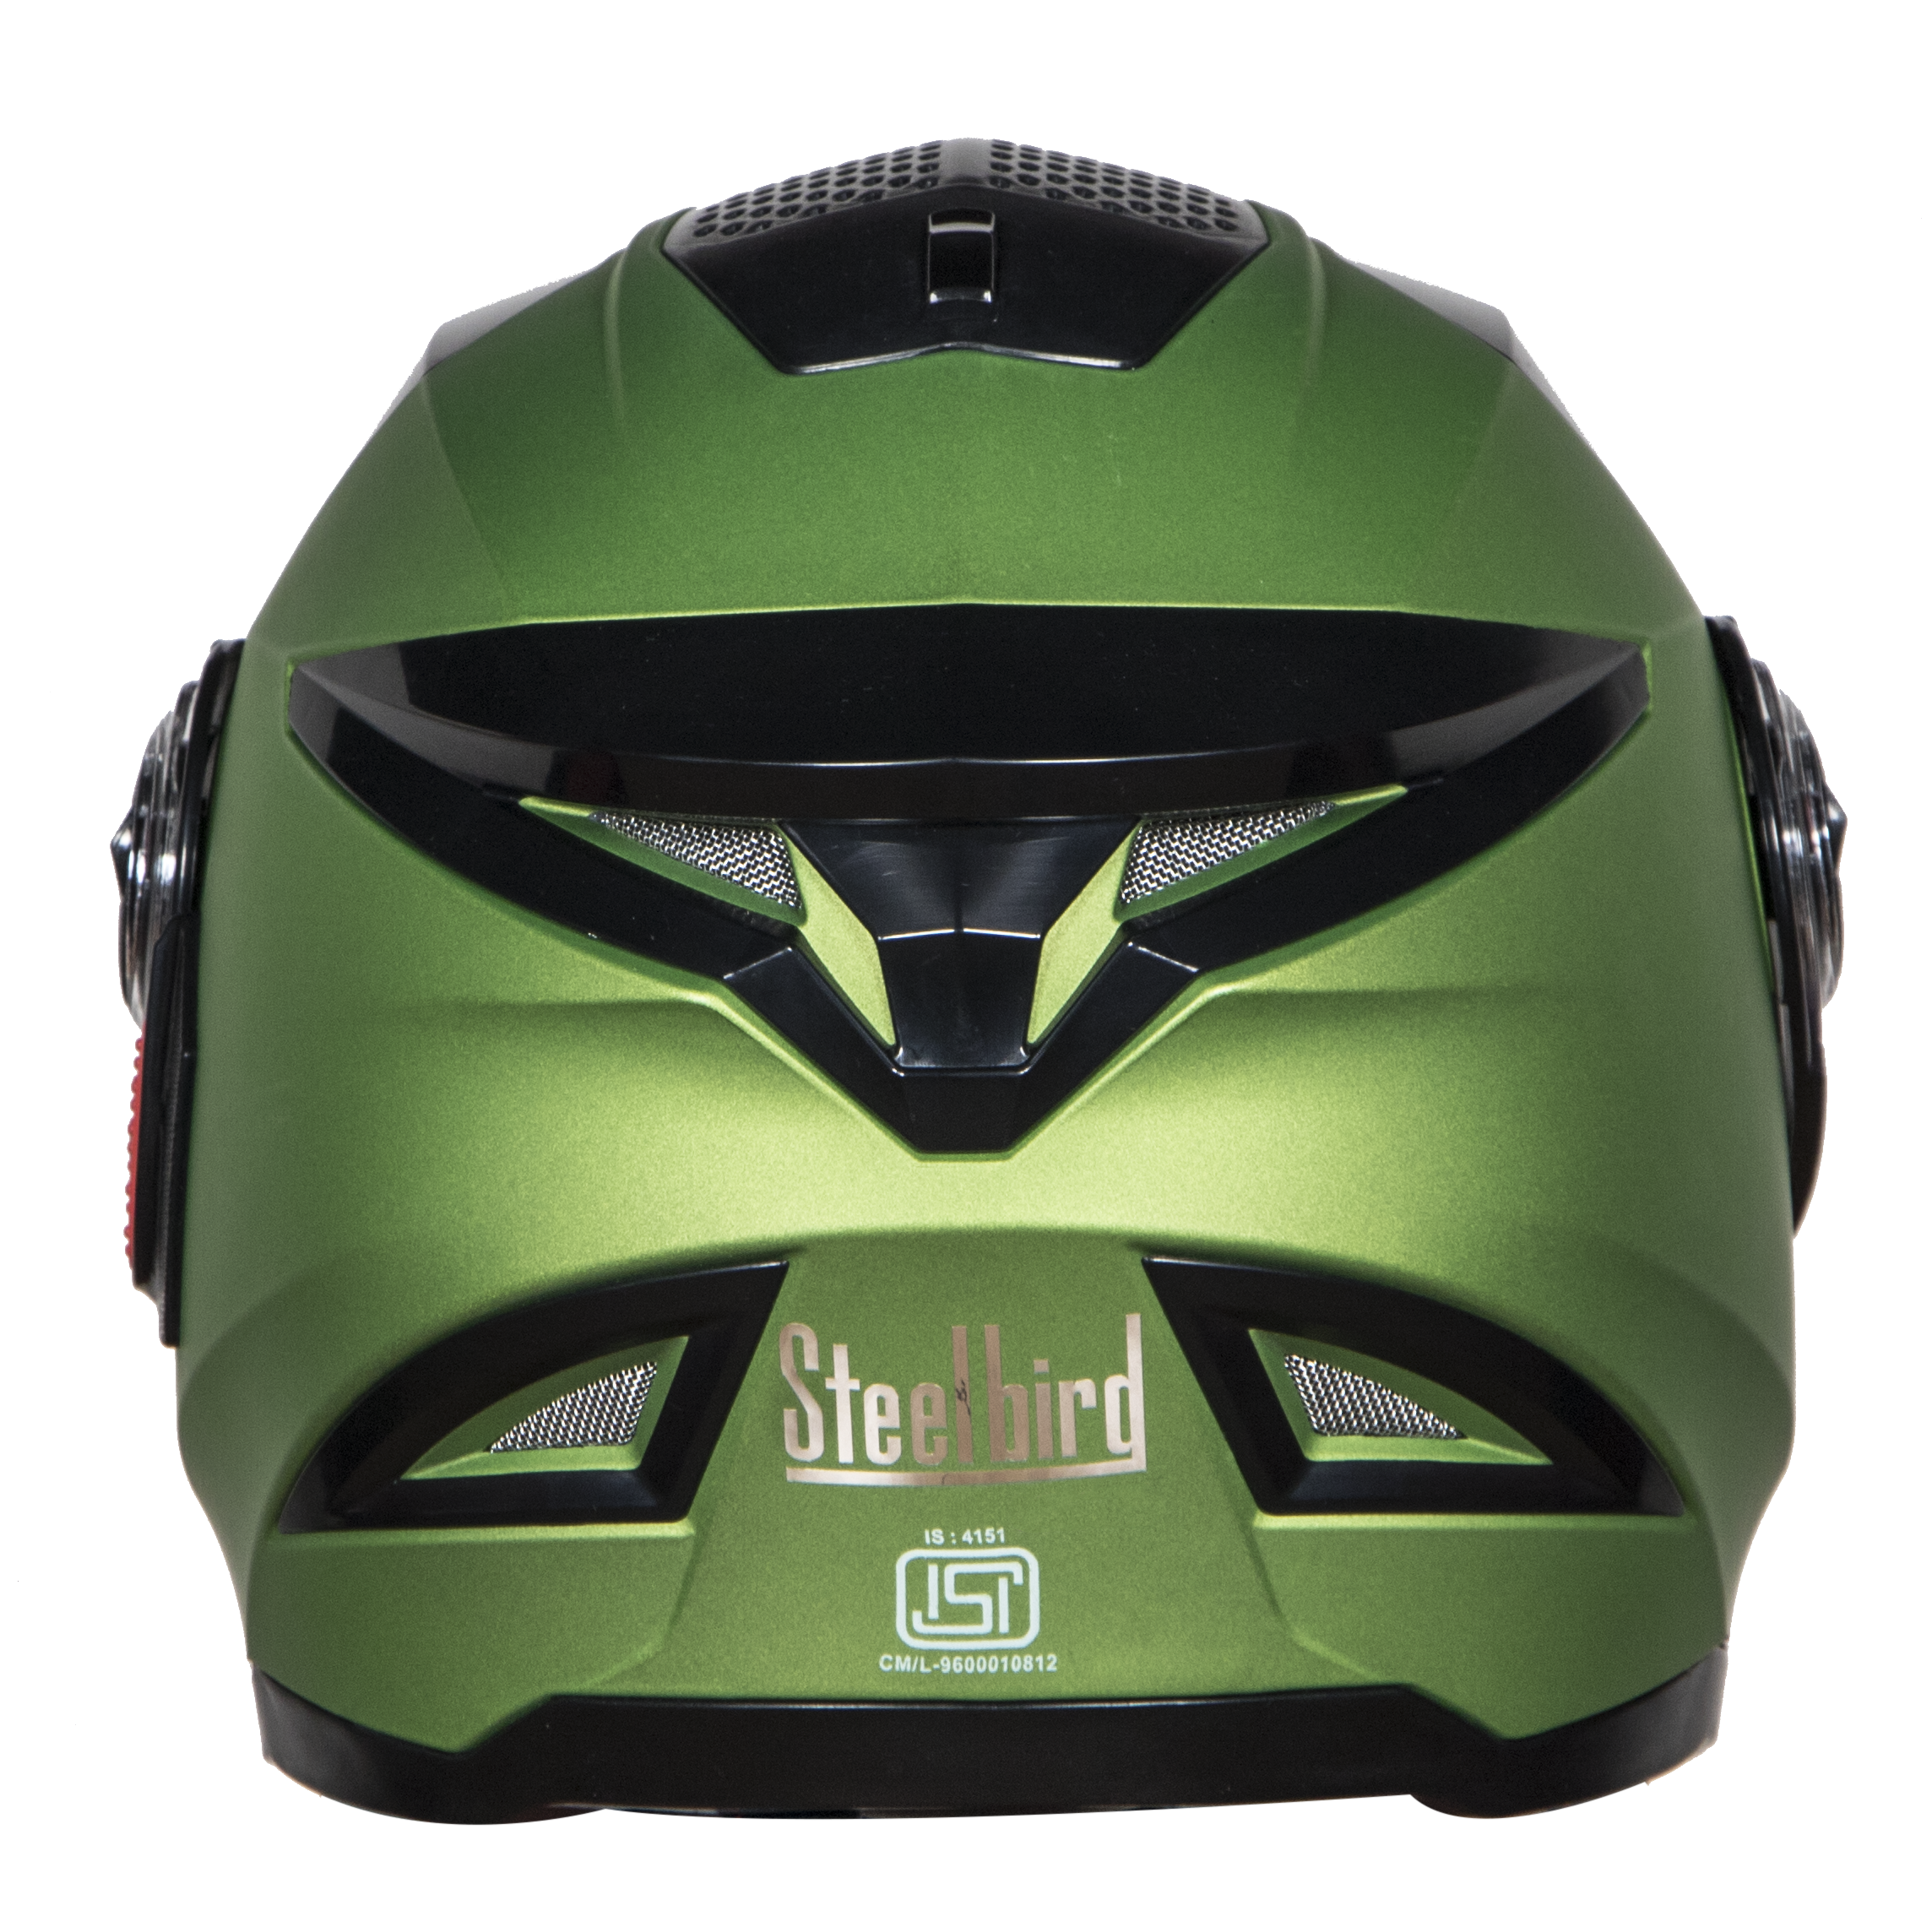 SBH-17 OPT MAT Y.GREEN (WITH EXTRA FREE CABLE LOCK AND CLEAR VISOR)